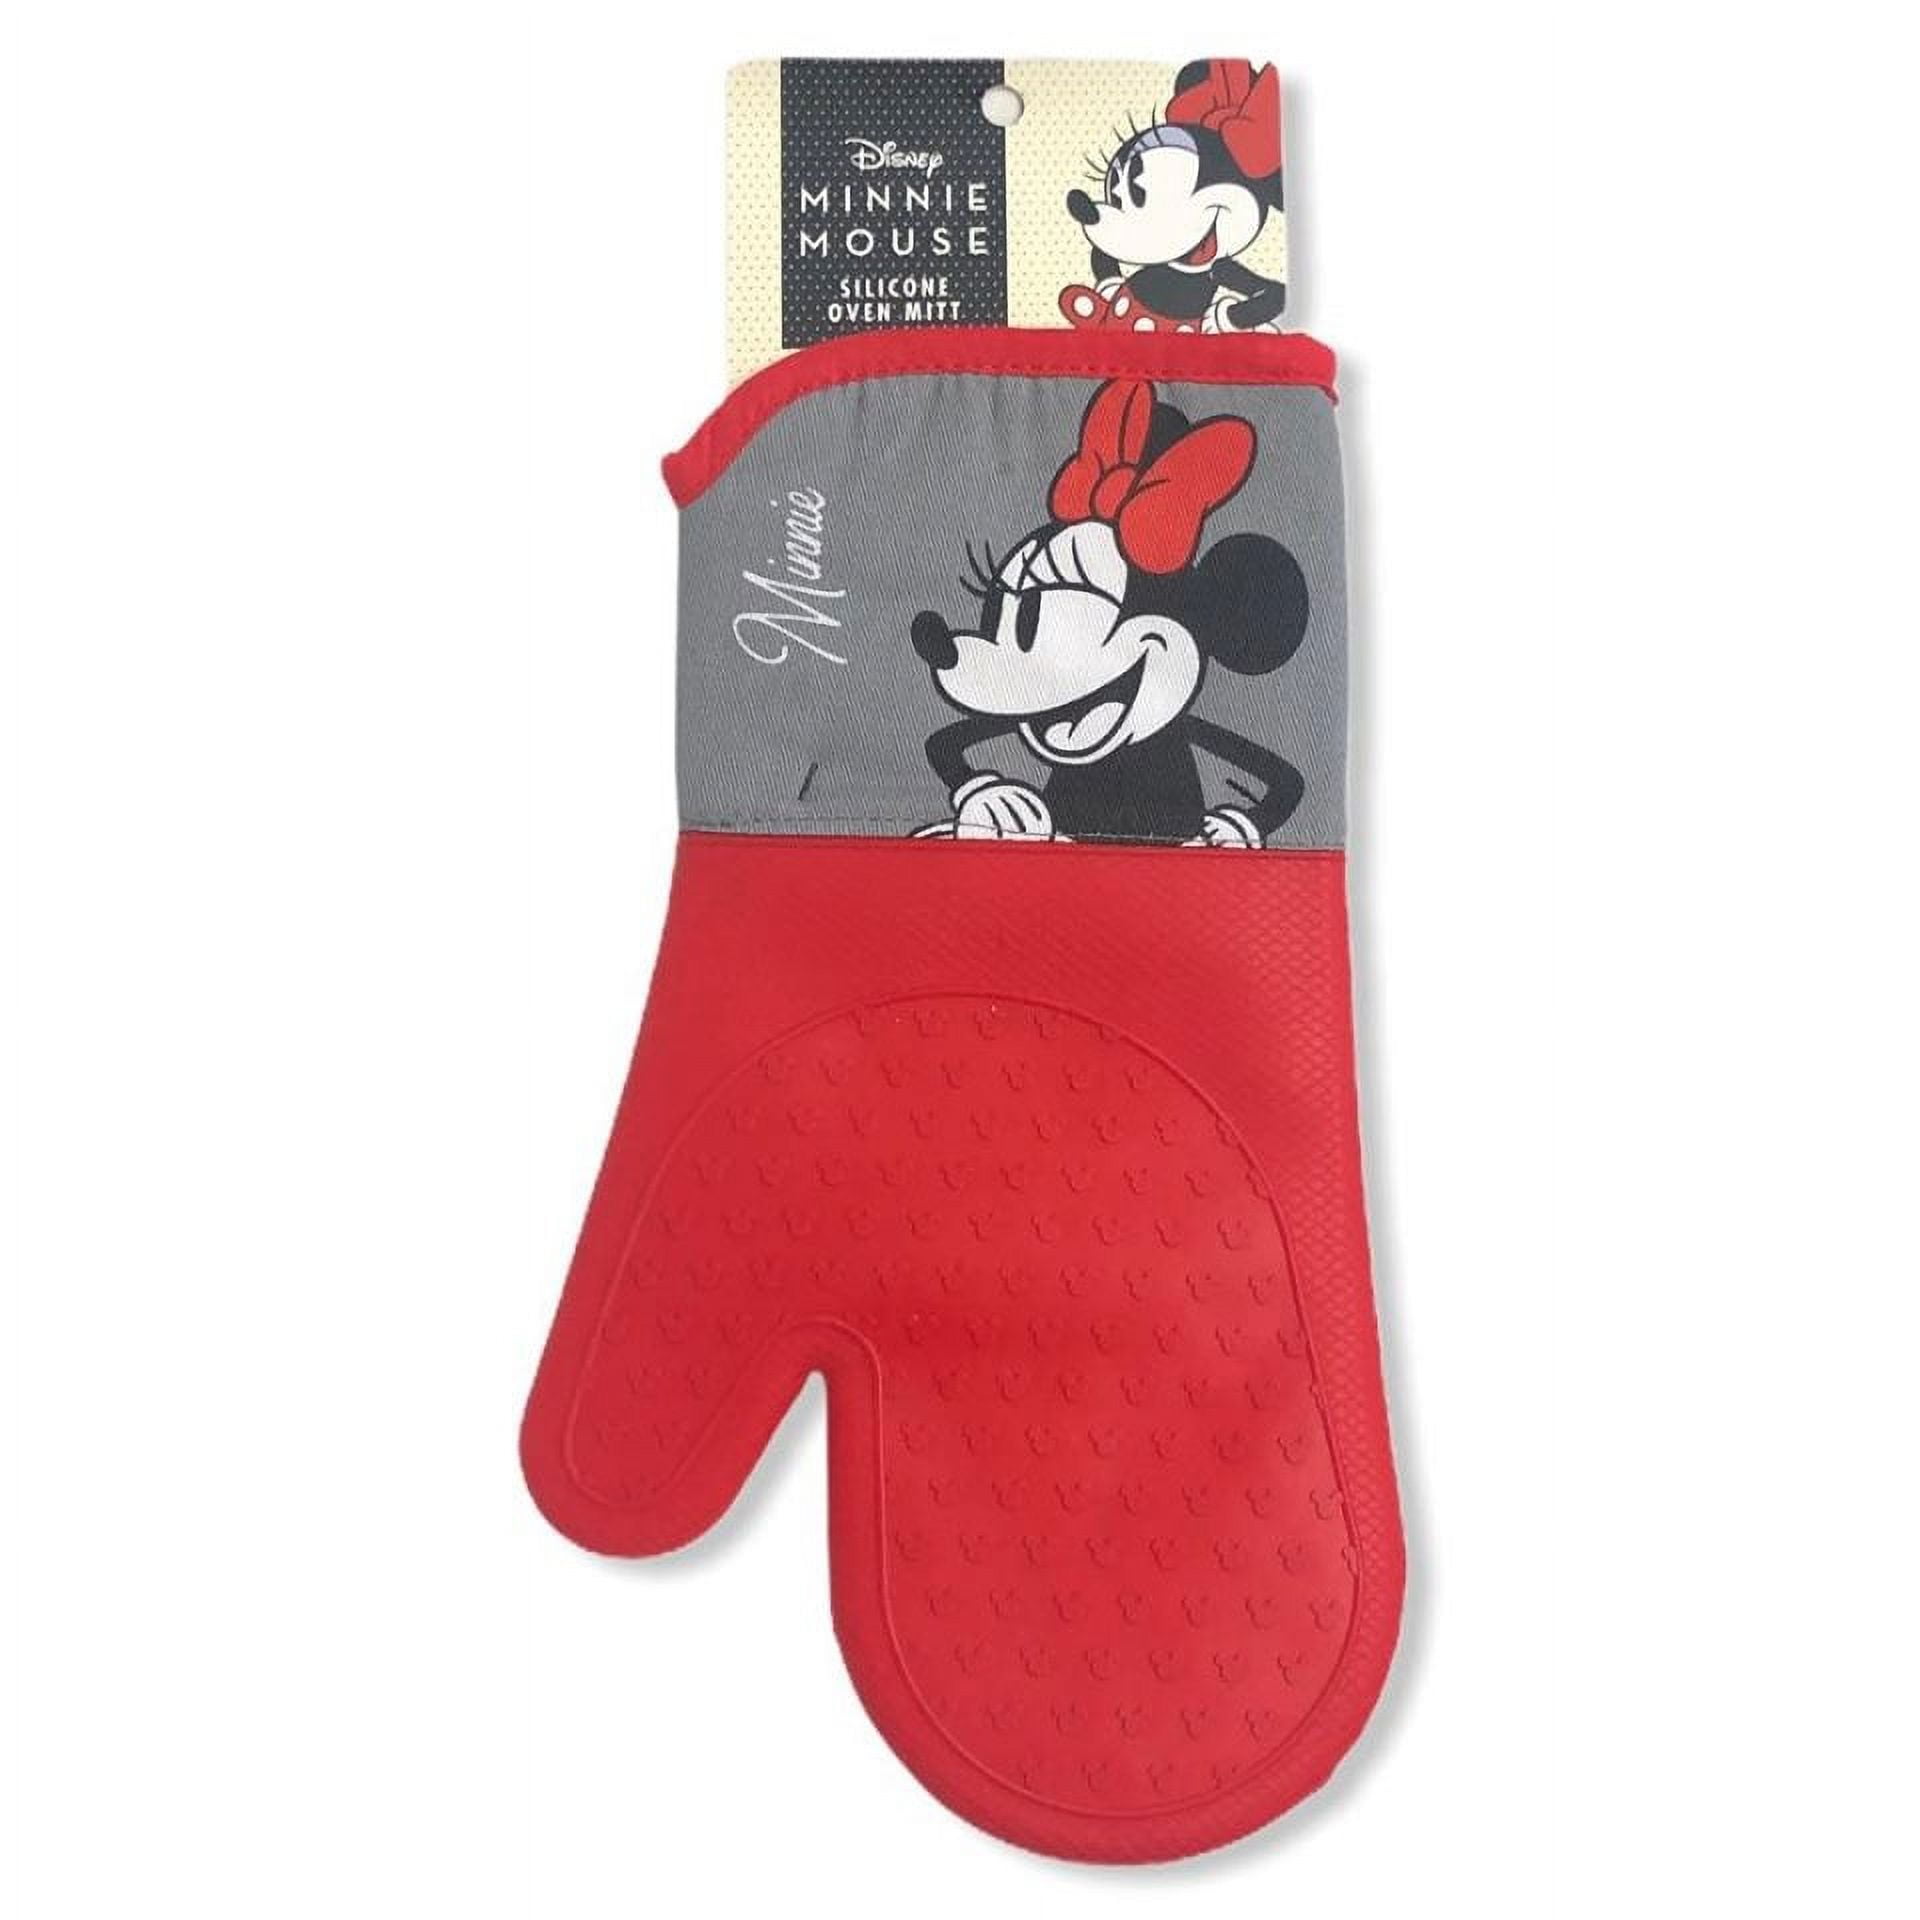  Disney Mickey Mouse Heat Resistant Kitchen Silicone Oven Mitt -  Mickey Hand : Home & Kitchen